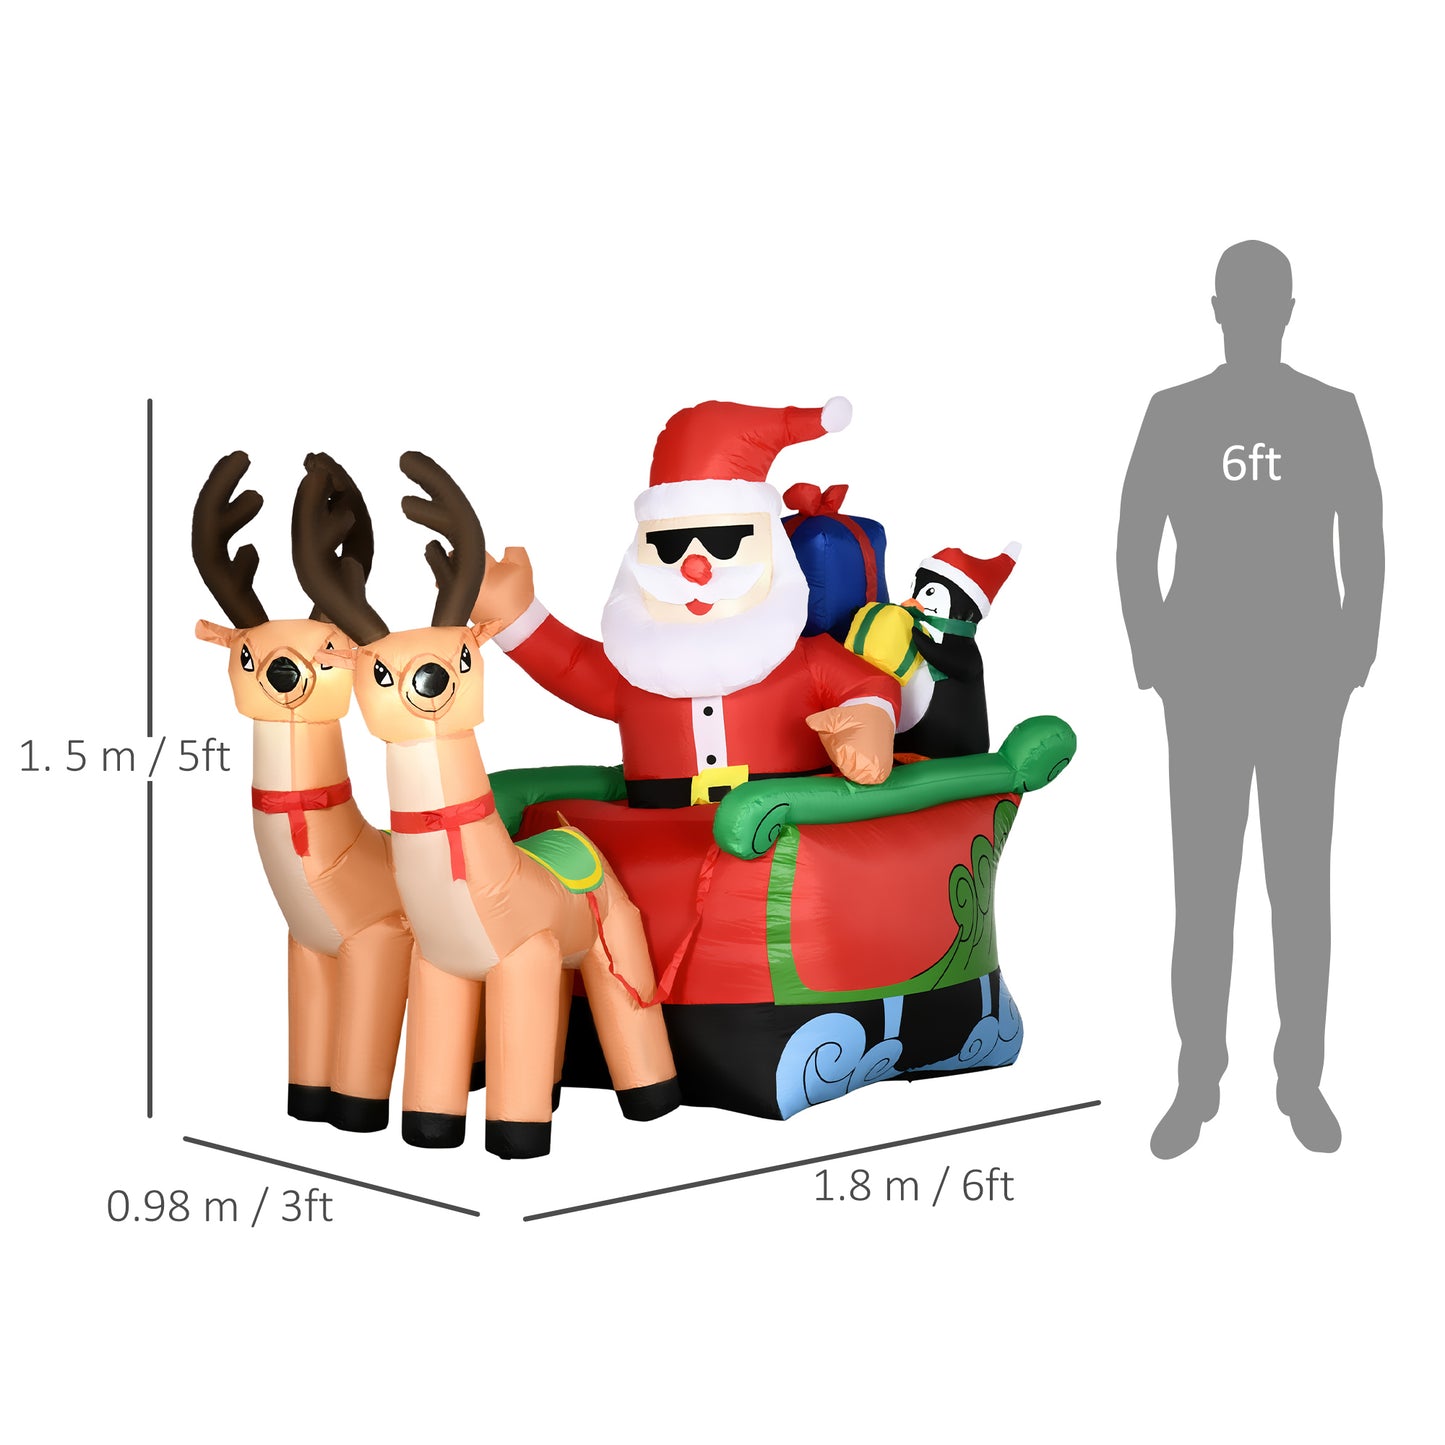 Outsunny 6ft Inflatable Christmas Santa Claus and Penguin on Sleigh with 2 Reindeer